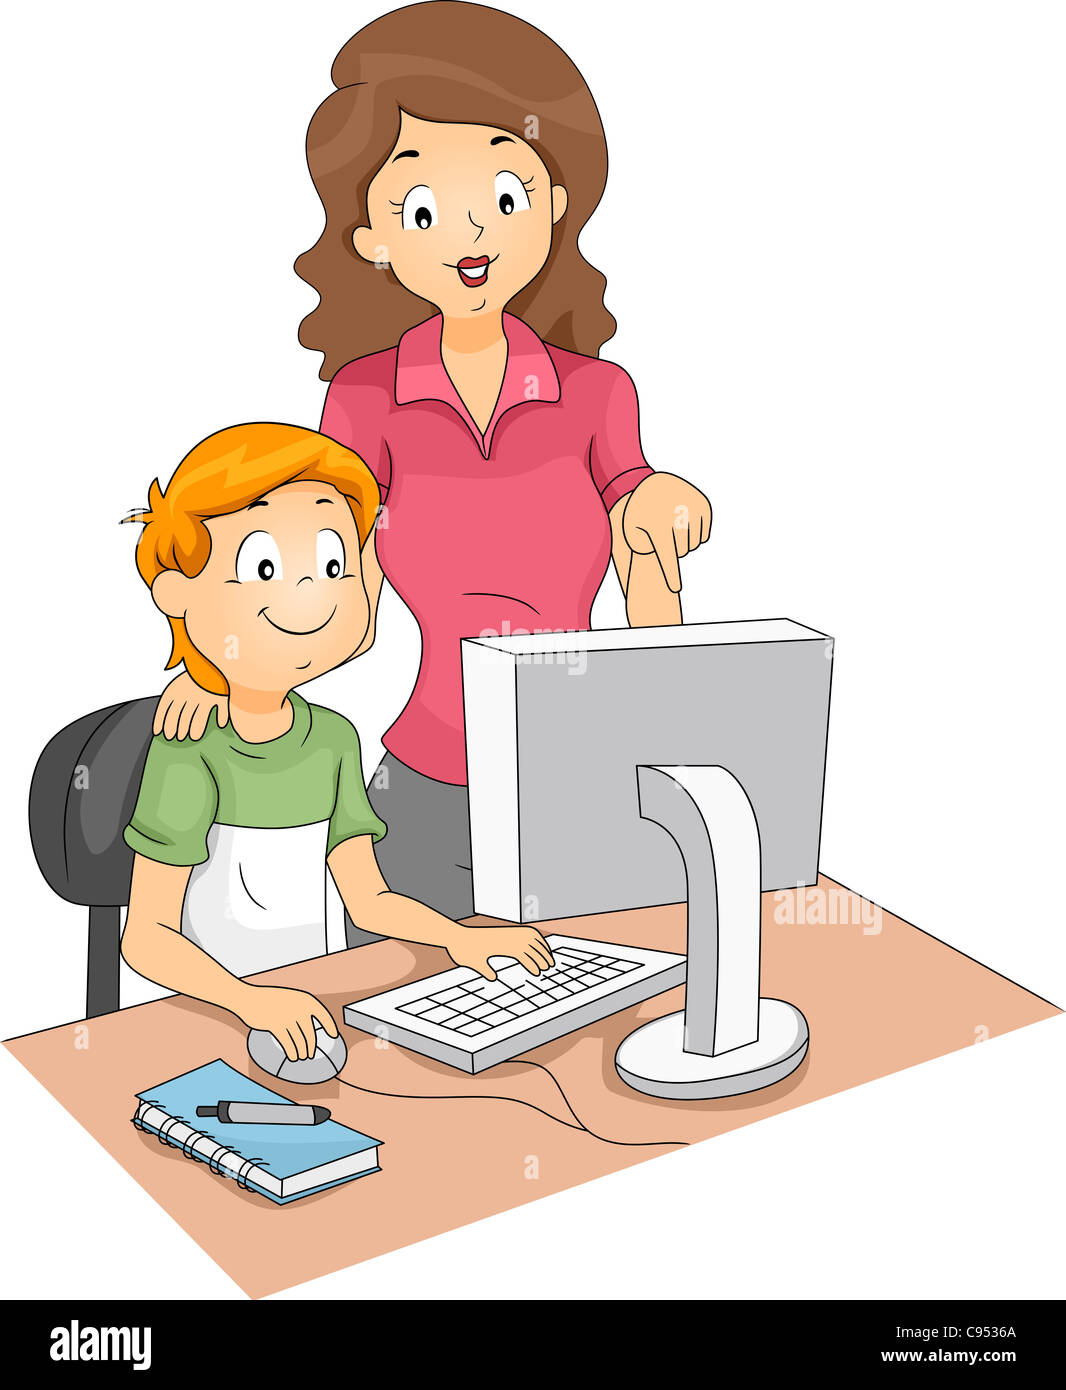 Illustration of a Computer Teacher Guiding Her Student Stock Photo